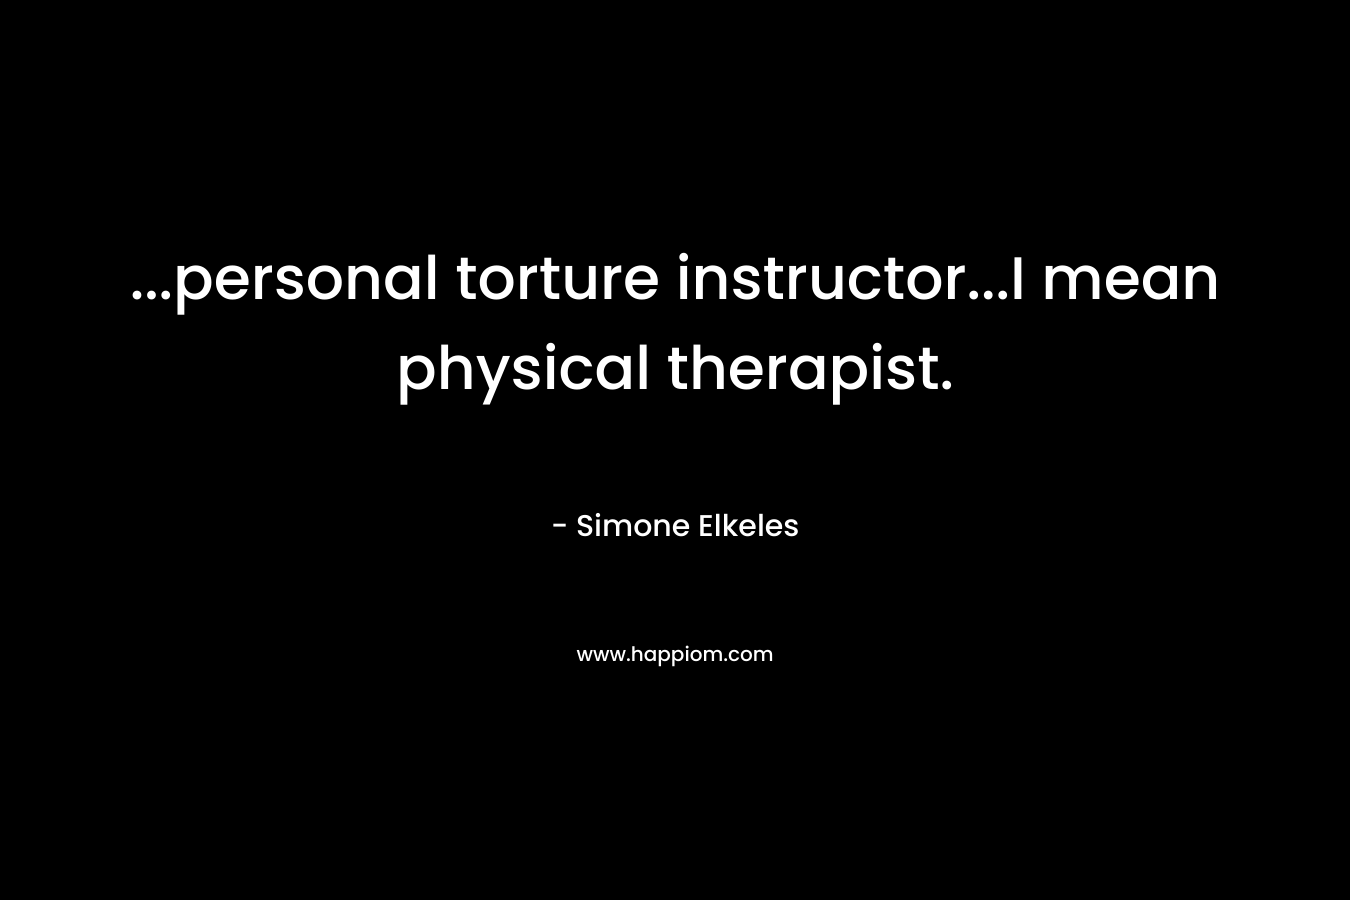 ...personal torture instructor...I mean physical therapist.